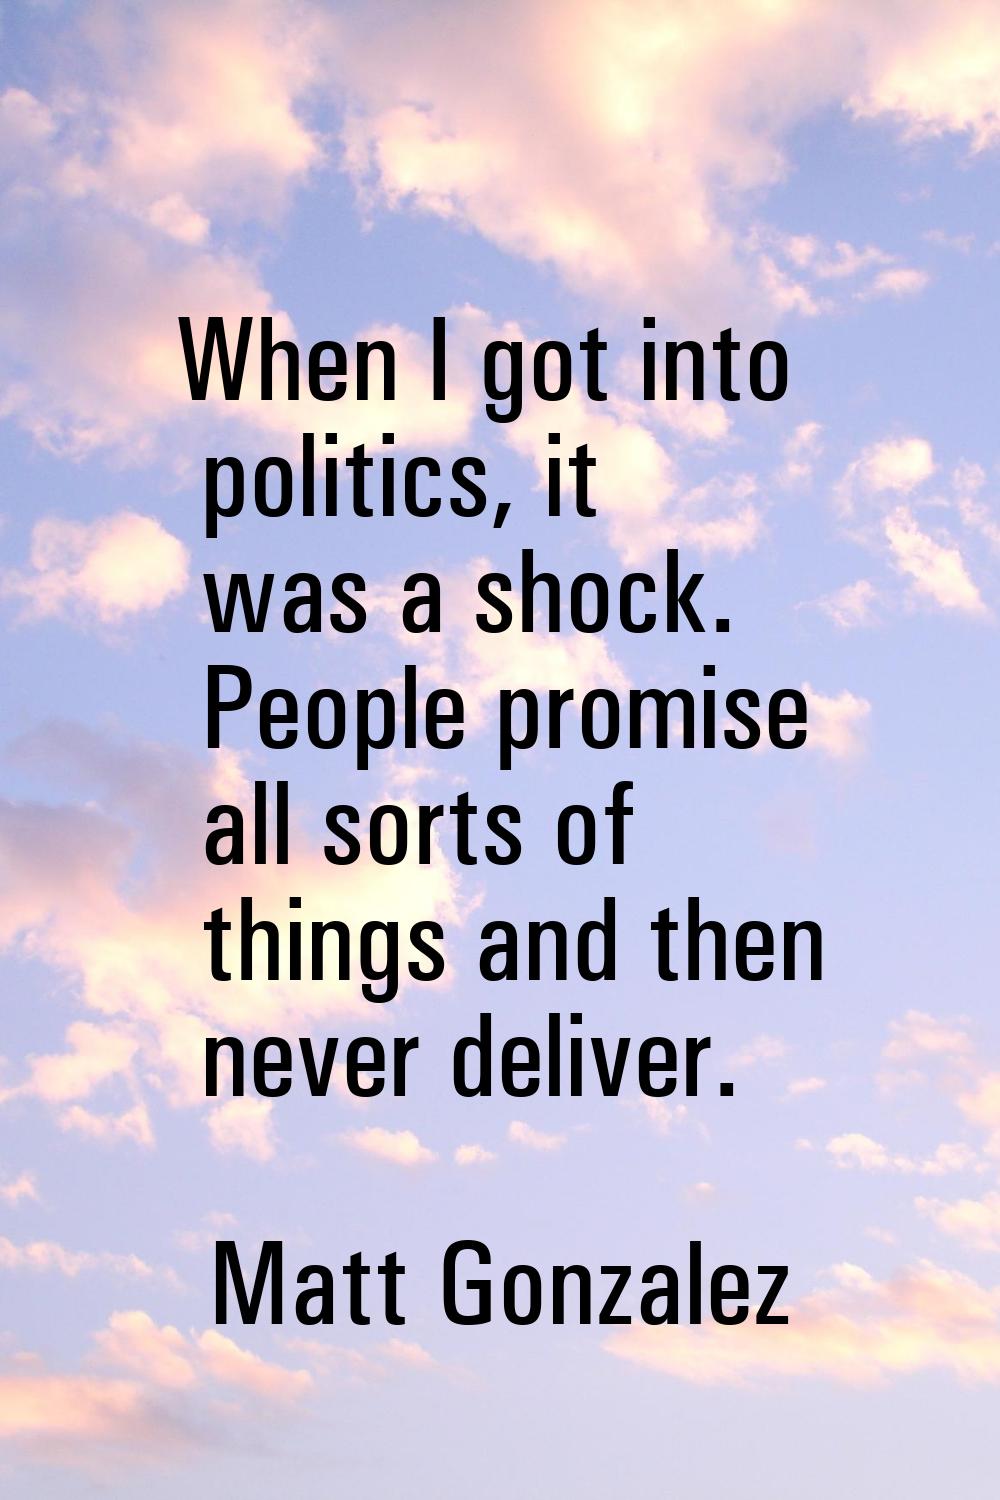 When I got into politics, it was a shock. People promise all sorts of things and then never deliver